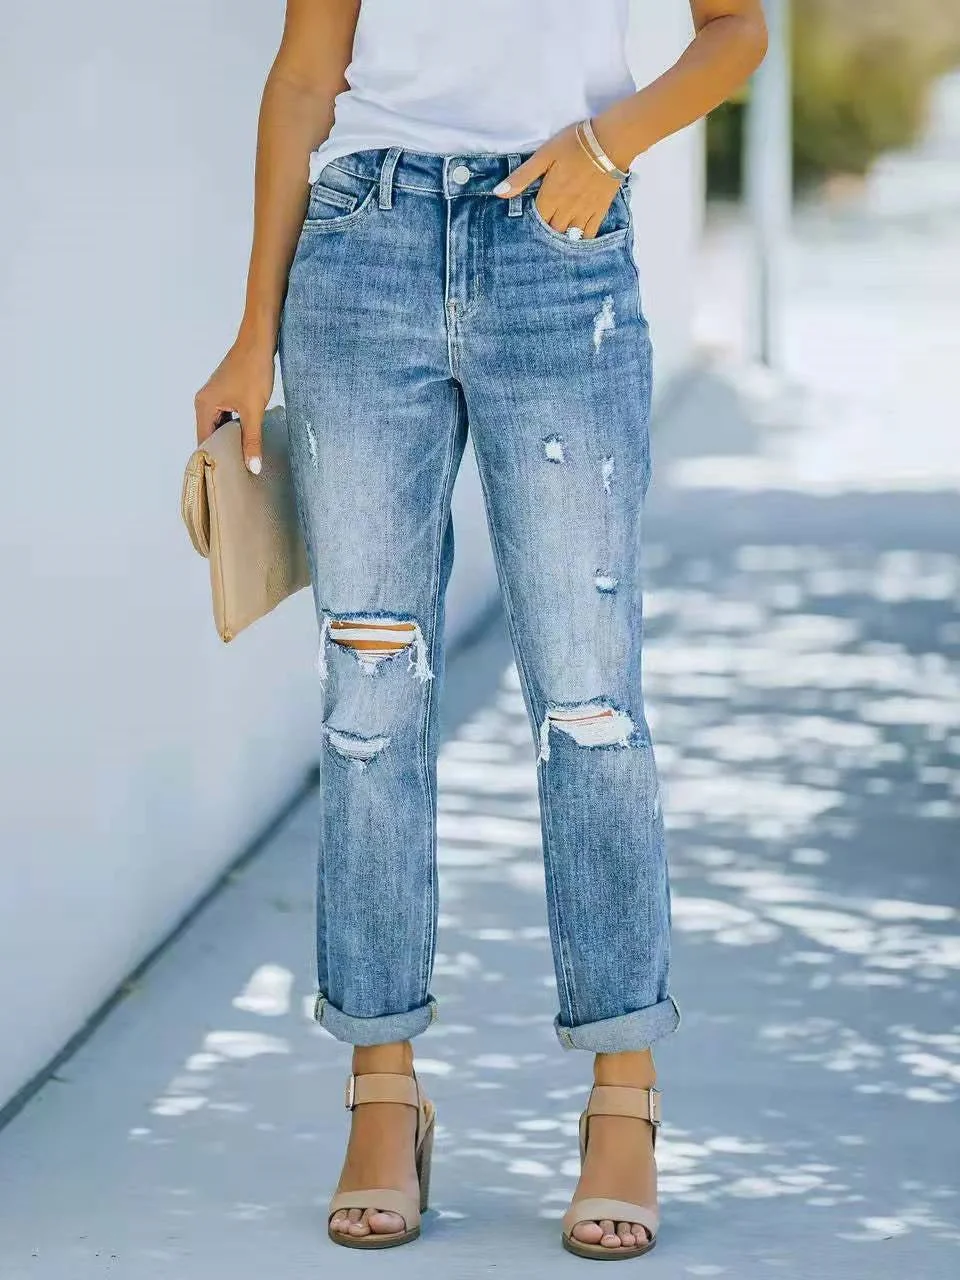 Women's Fashion Trend Ripped Jeans